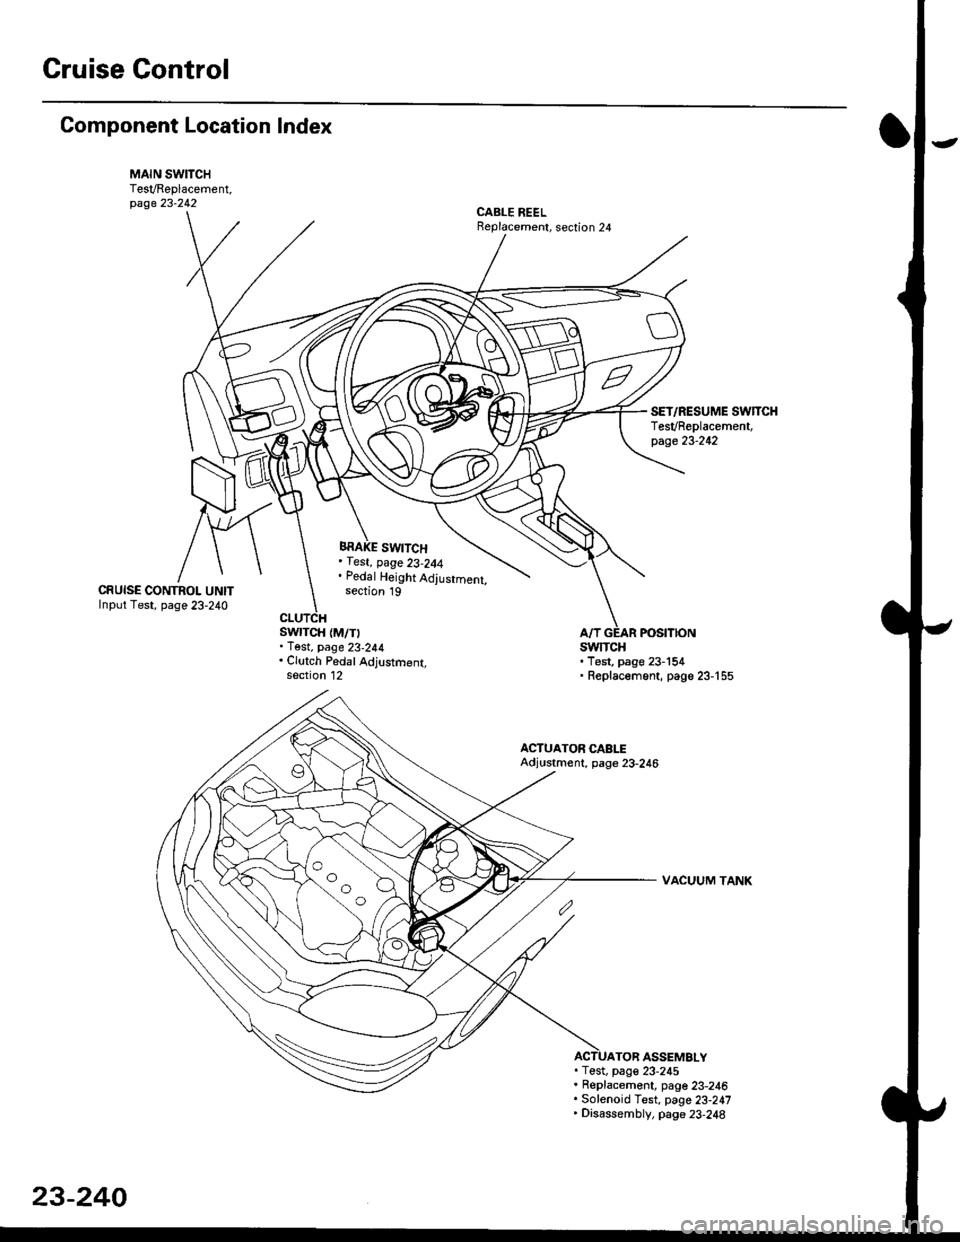 HONDA CIVIC 1998 6.G Owners Manual Gruise Control
Component Location Index
MAIN SWITCHTesVReplacement,page 23-242CABLE REELReplacement, section 24
BRAKE SWITCH, fest, page 23-244. Pedal Height Adjustment,section 19CRUISE CONTROI. UNITI